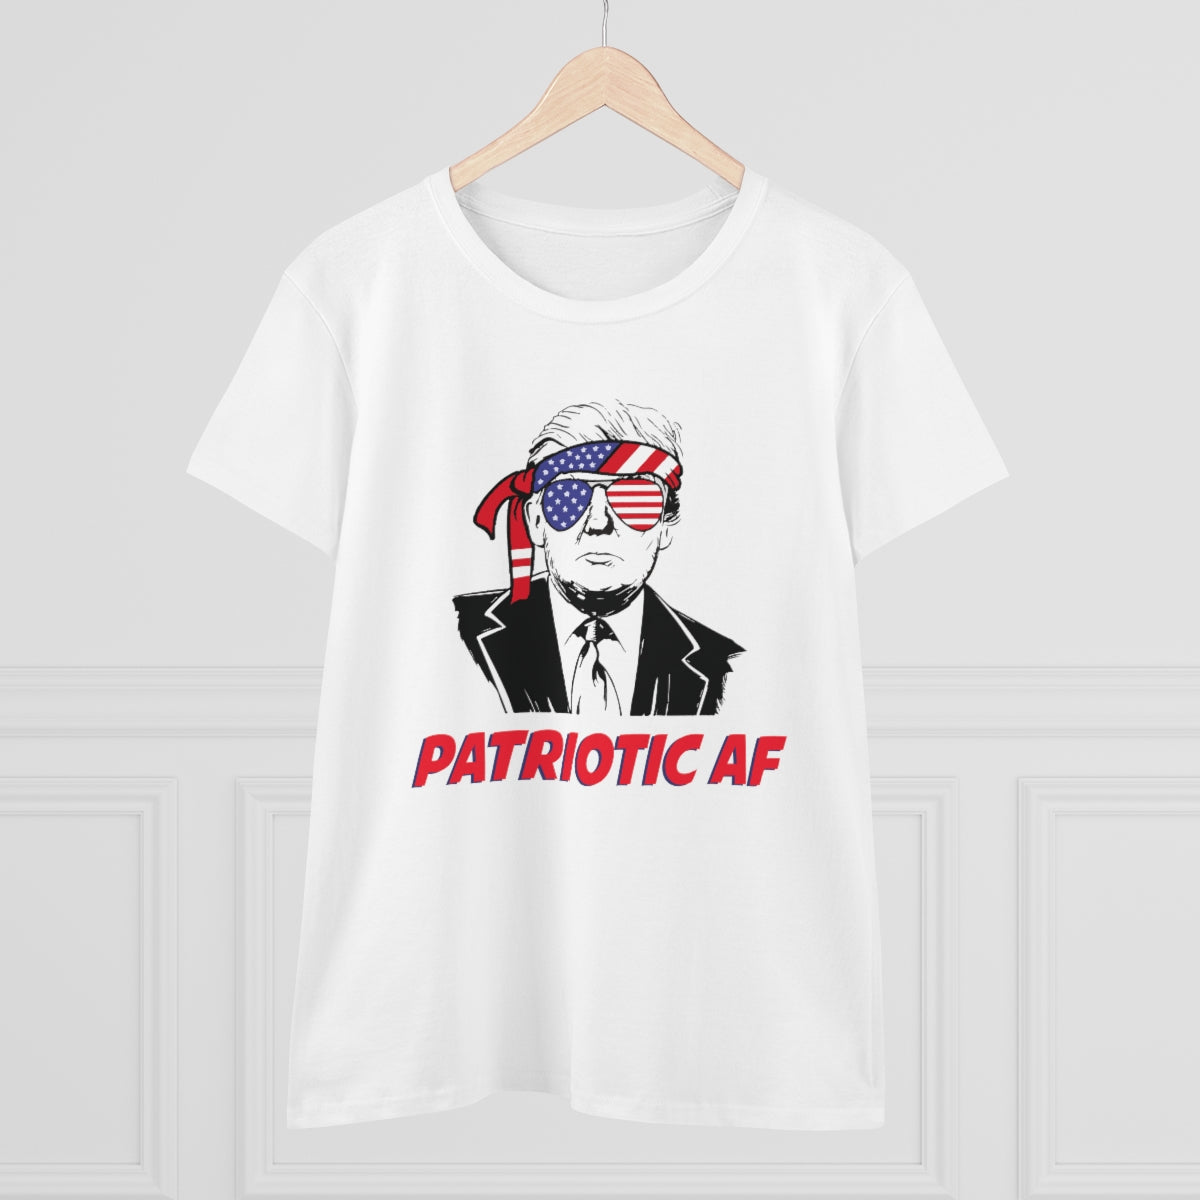 Patriotic AF with Trump | Women's Tee - Rise of The New Media